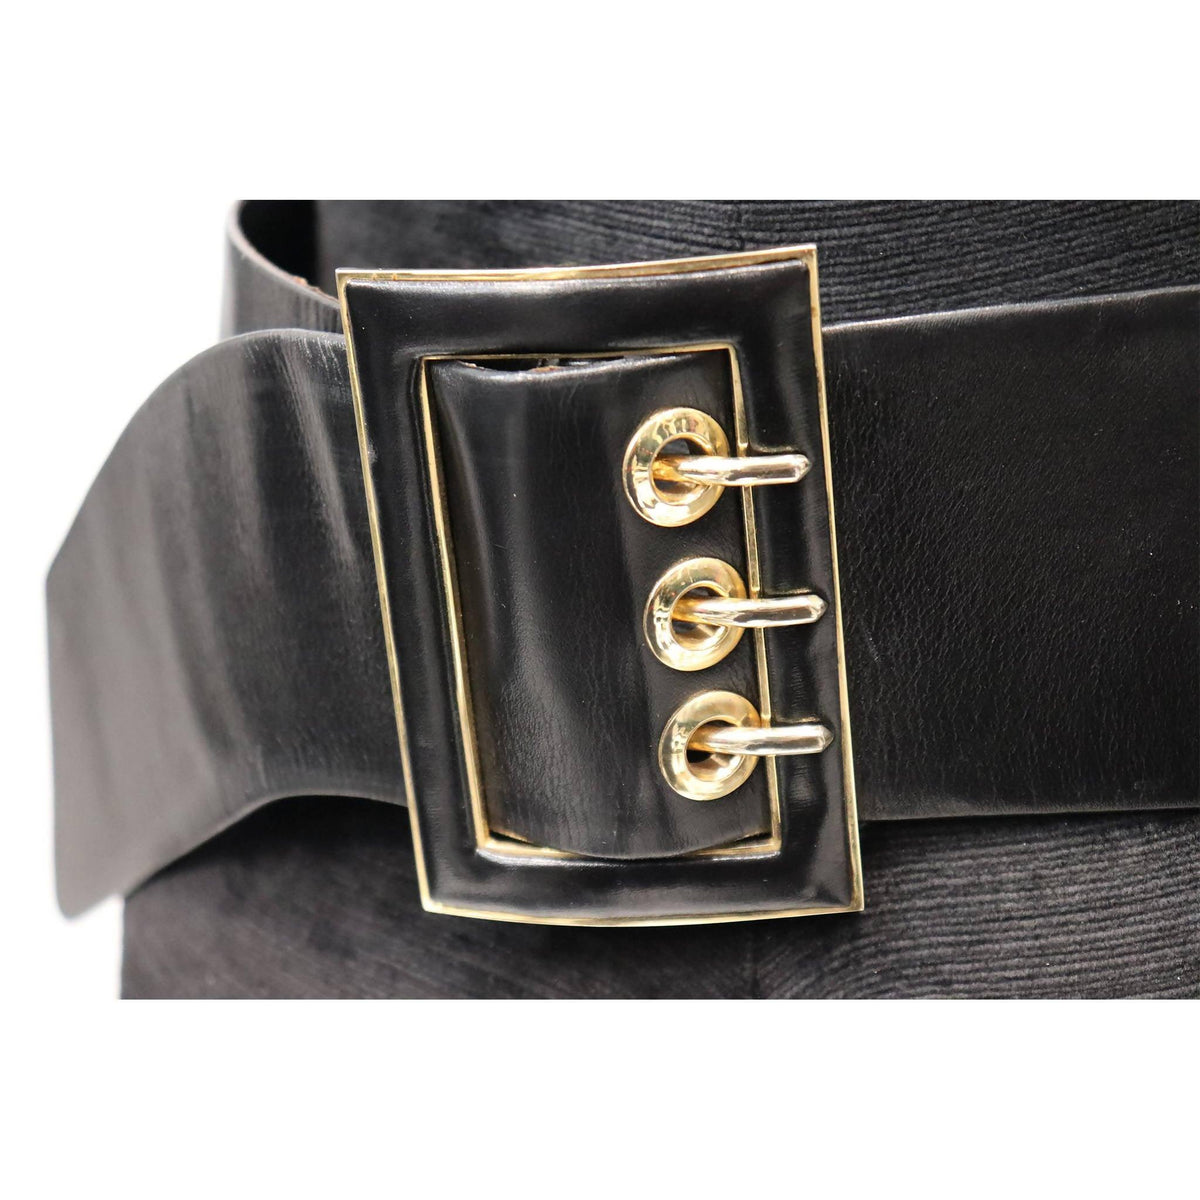 Pre-Owned JUDITH LEIBER Black Leather Belt with Gold Rectangle Buckle - theREMODA